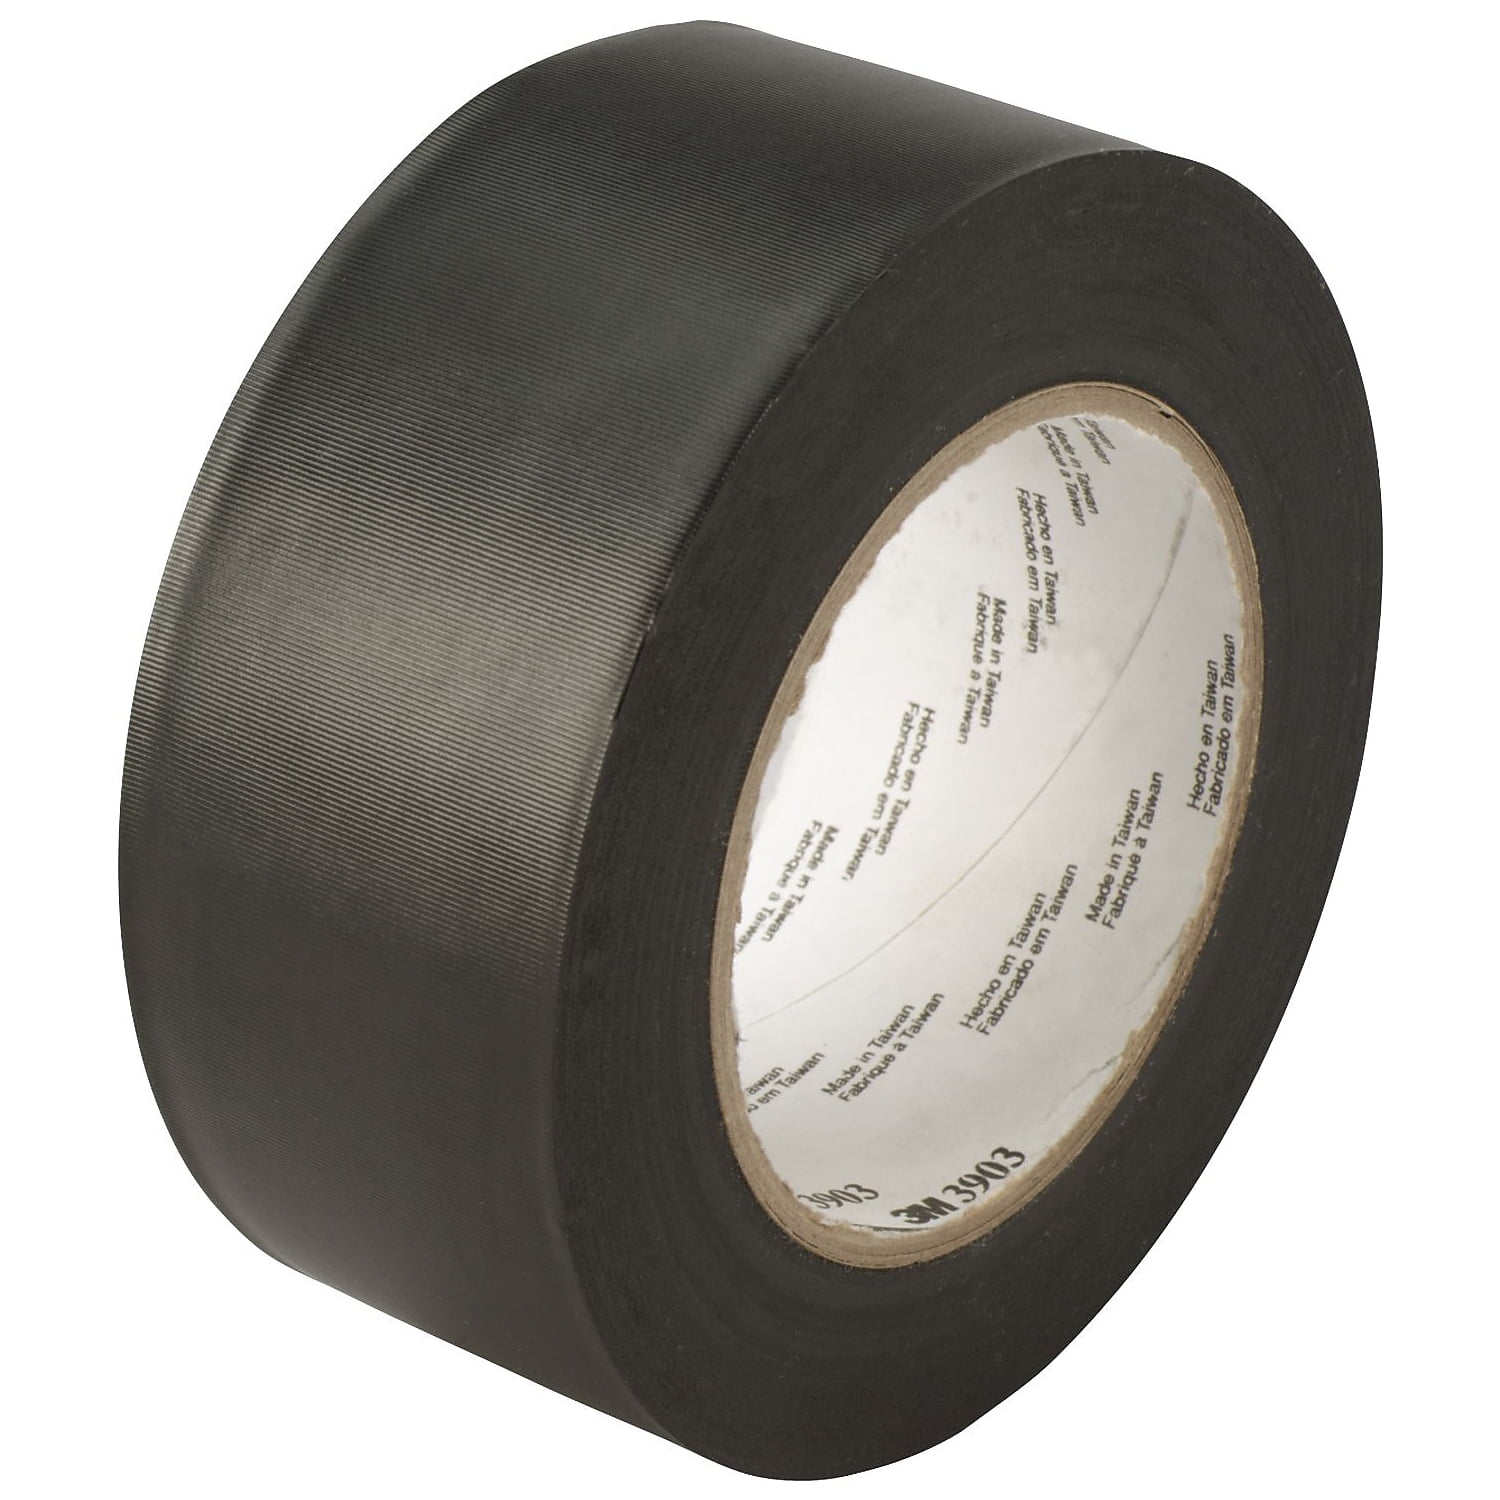 T98739033pkb Black Duct Tape, 2 In. X 50 Yards - Pack Of 3 - 3 Per Case